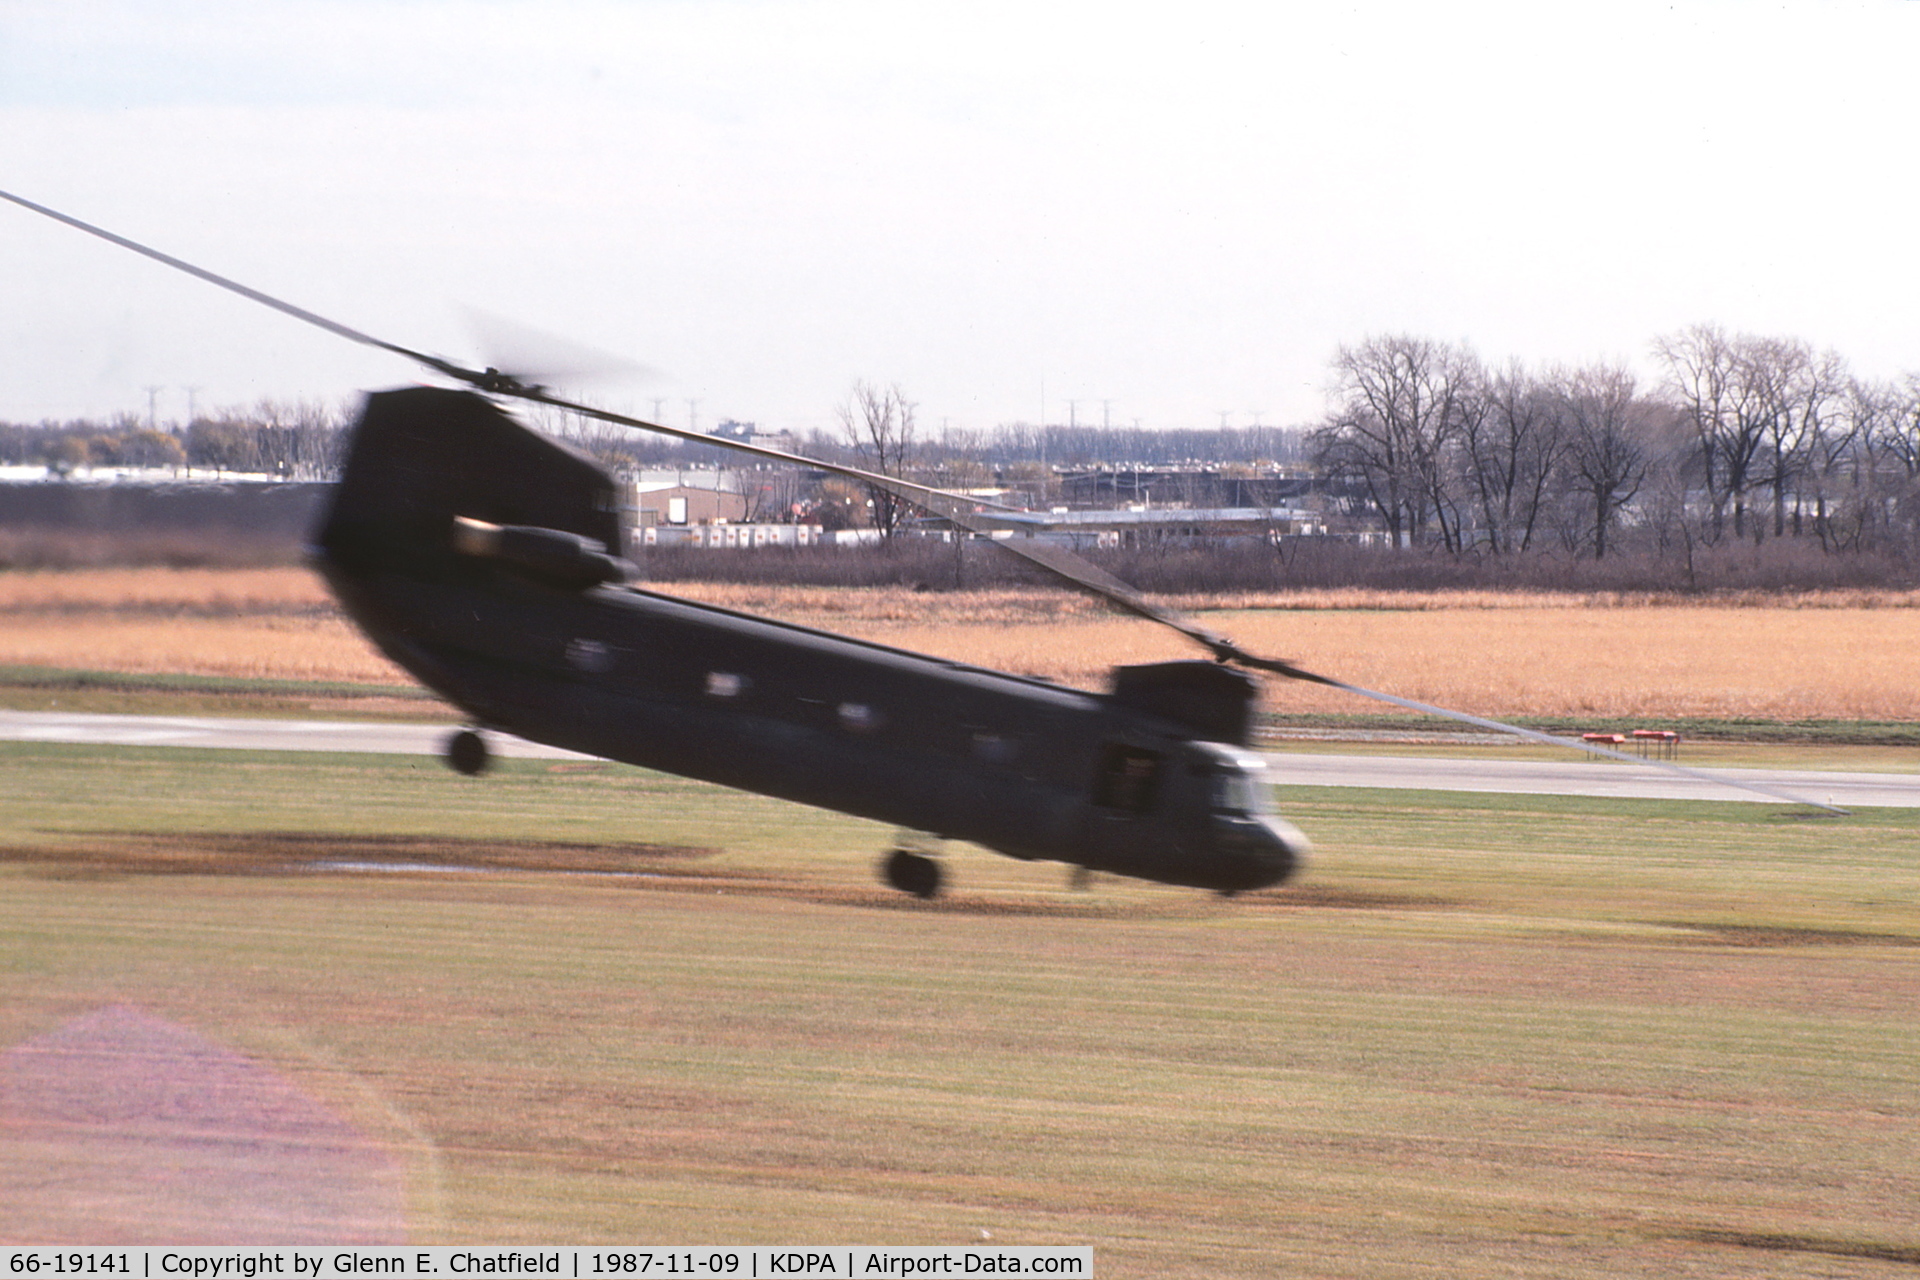 66-19141, 1967 Boeing Vertol CH-47B Chinook C/N B.399, Taking off southwest bound, passing the control tower.